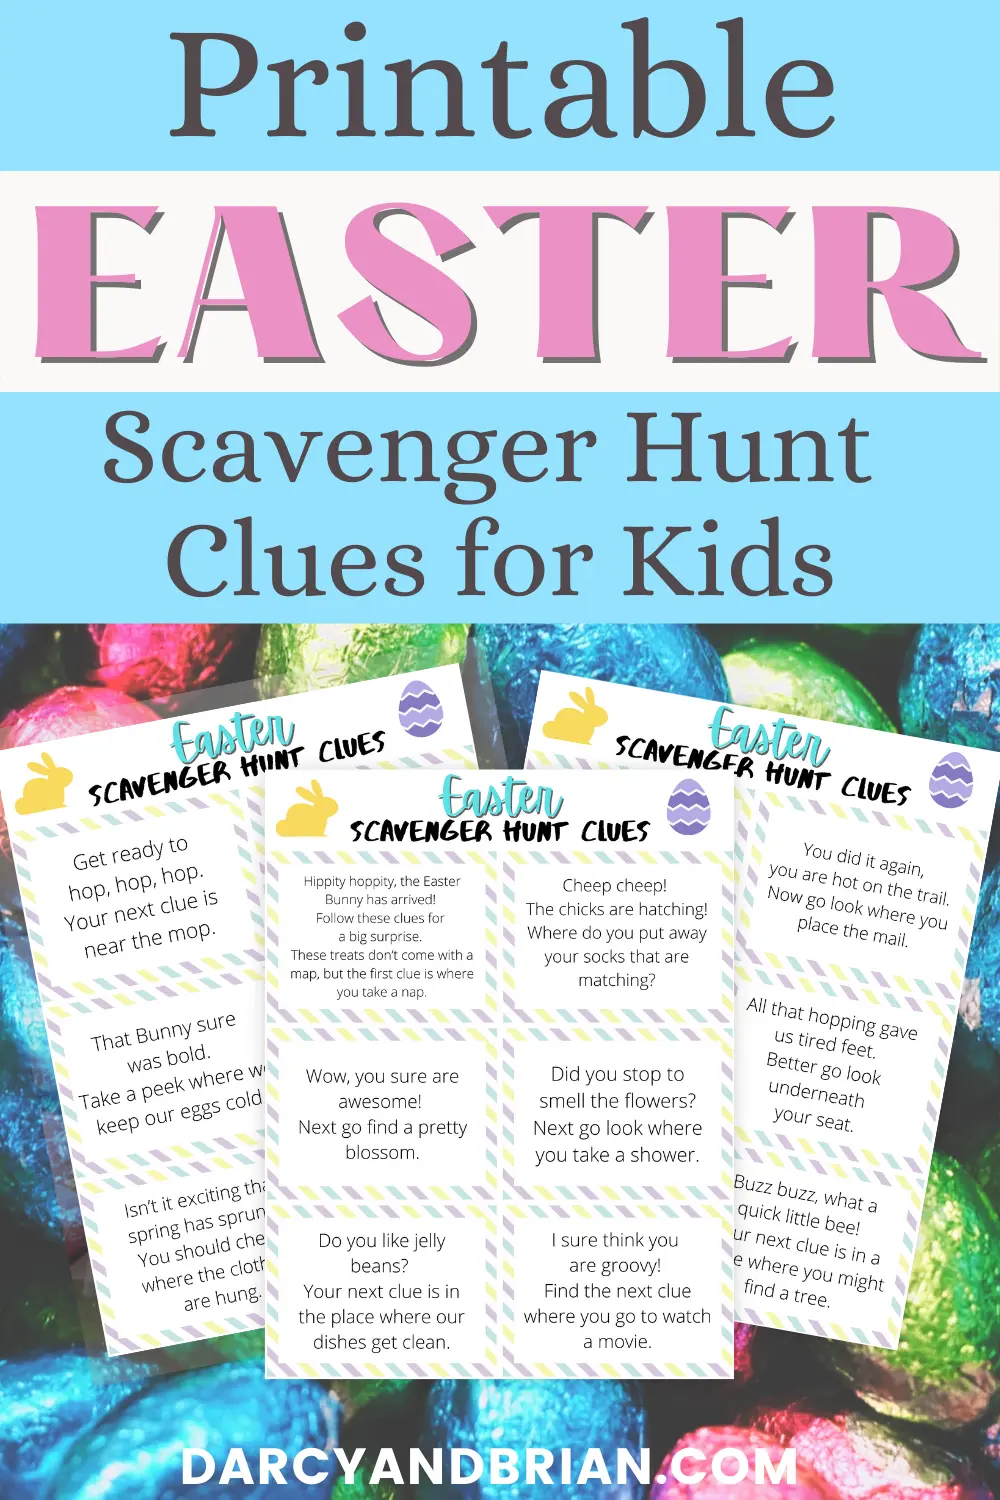 Black and pink text on light blue and white reads Printable Easter Scavenger Hunt Clues for Kids above preview image of three pages of scavenger hunt clues overlapping each other on a background of bright, foil covered chocolate eggs.